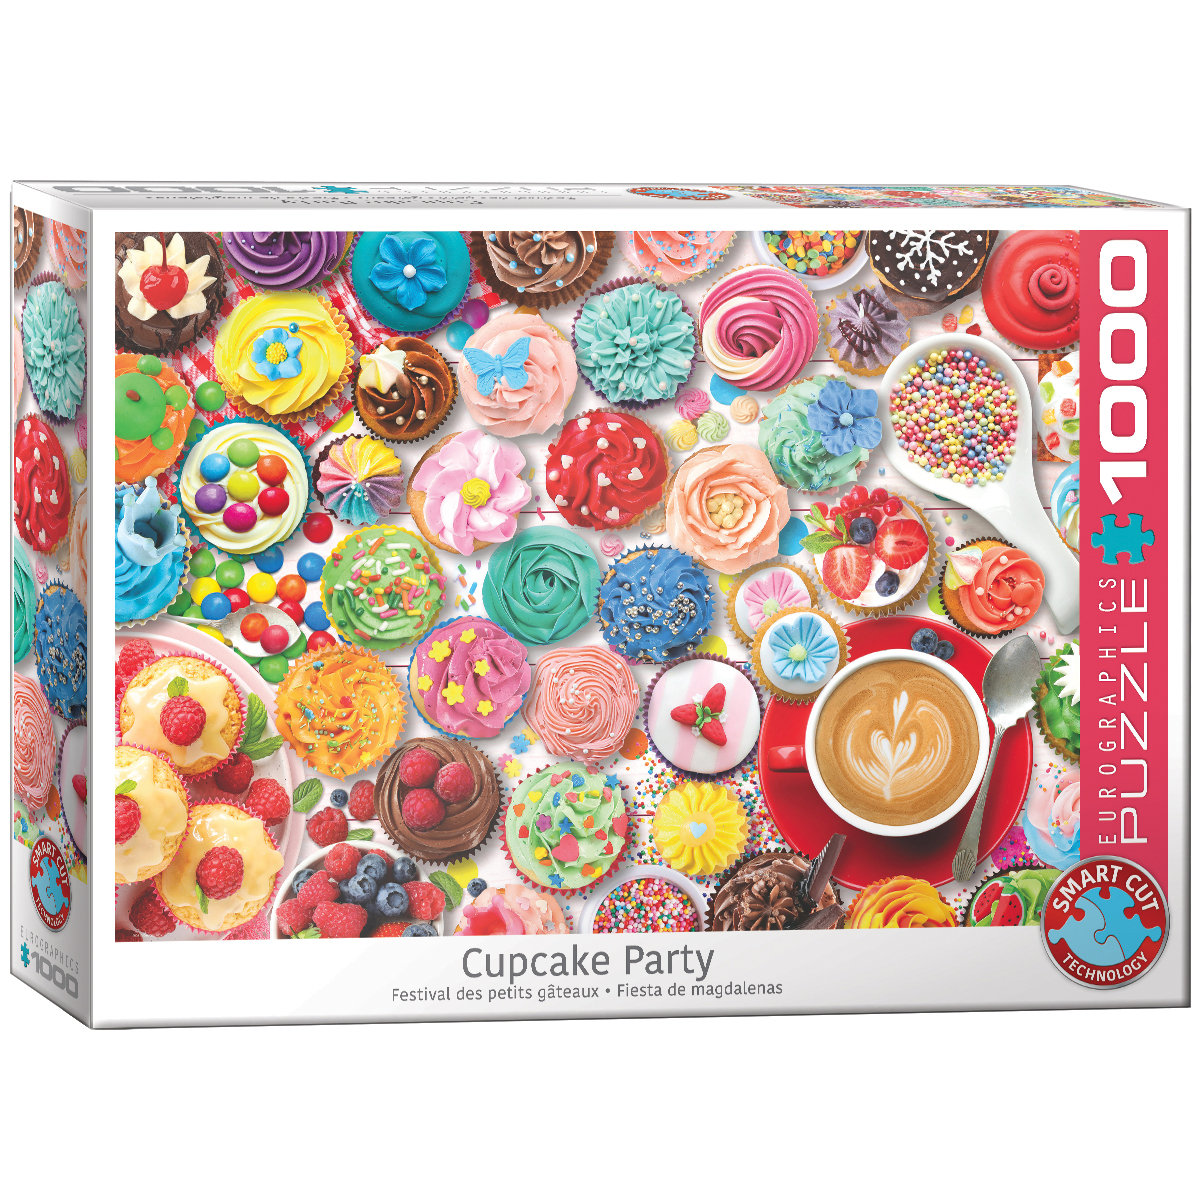 Eurographics Puzzle 1000 Cupcake Party 6000-5604 -